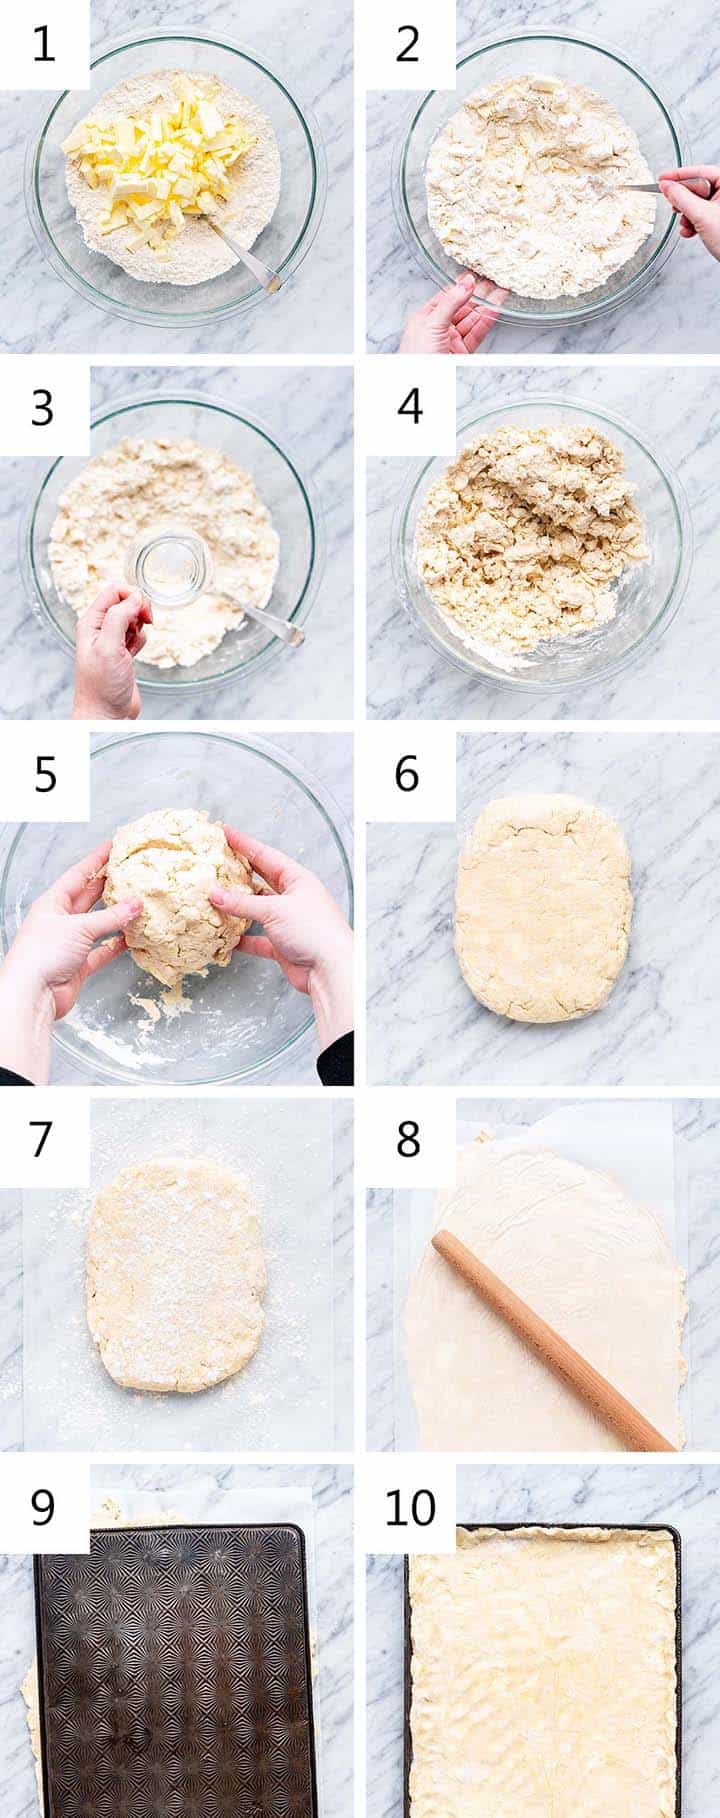 how to make and roll out pie dough from scratch